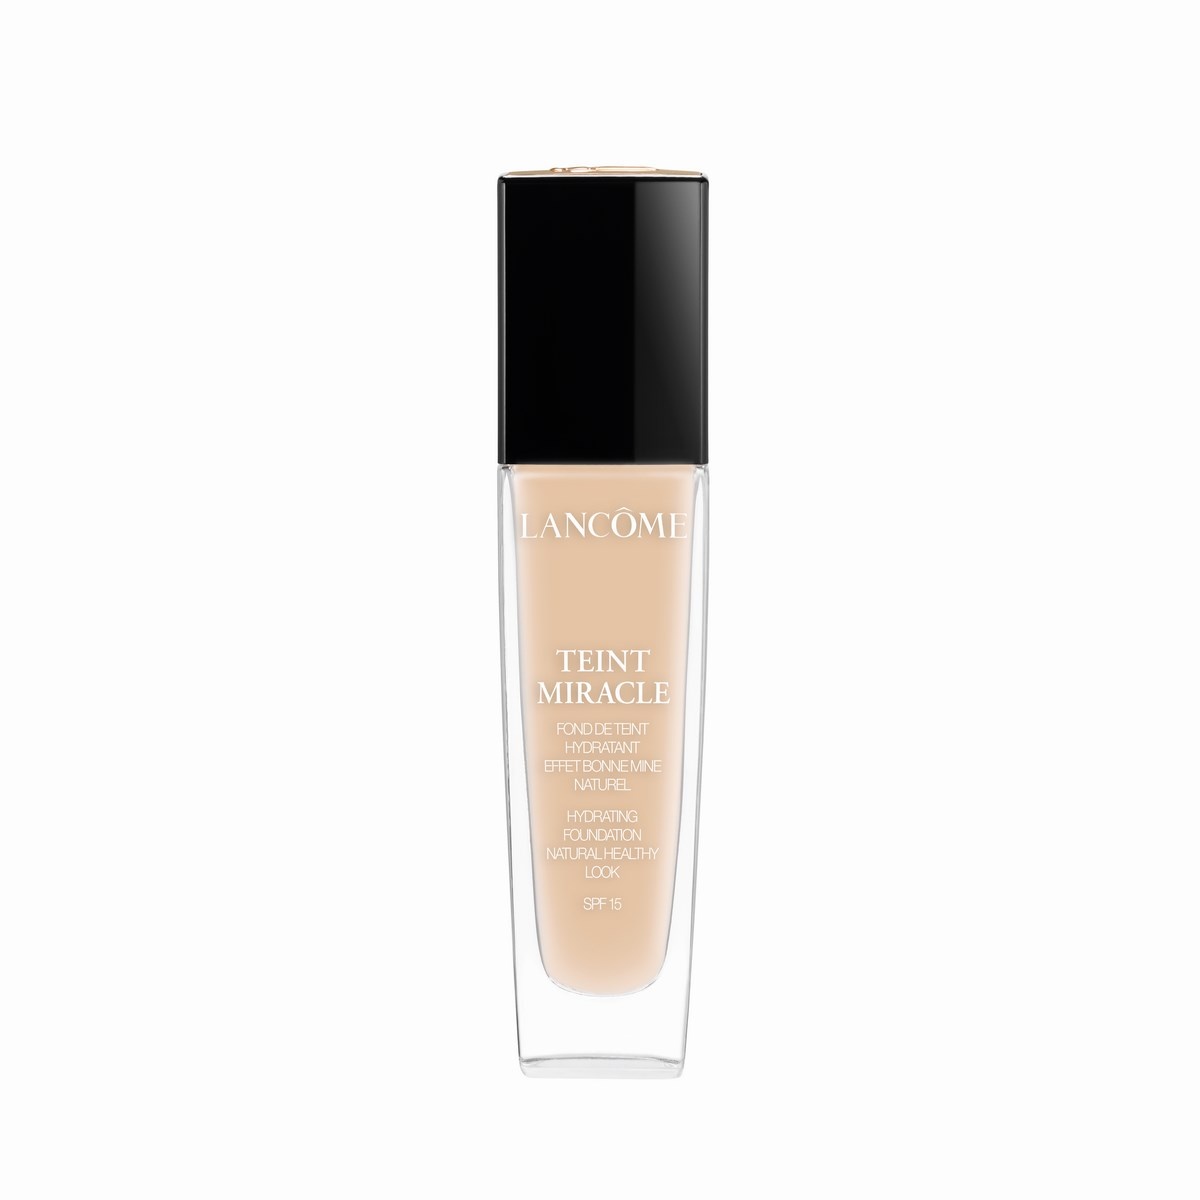  Teint Miracle Hydrating Foundation, 01 Beige Albatre